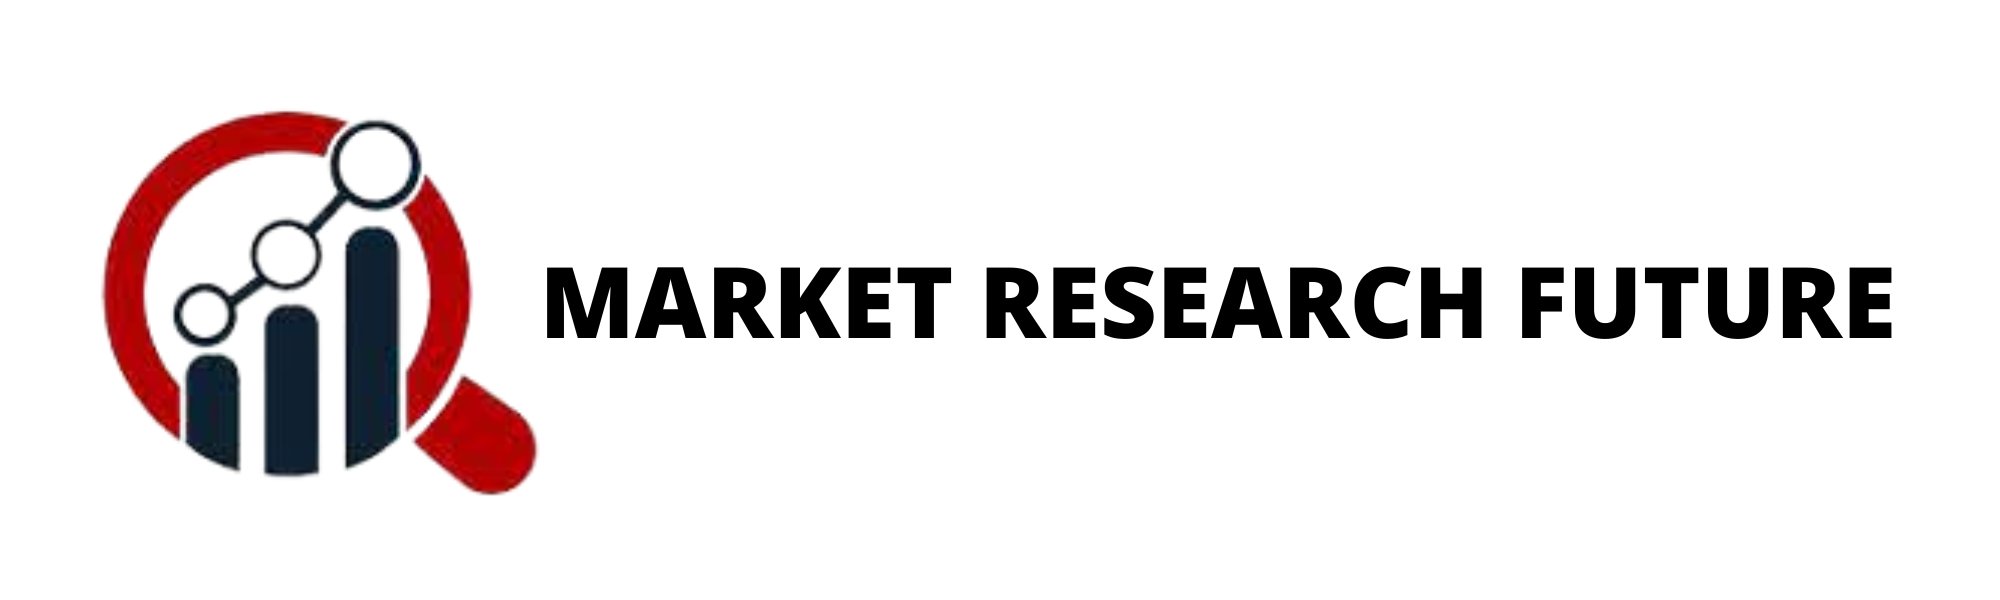 Dimethyl Ether Market Demand, Share, Key Players, Growth Trend And...